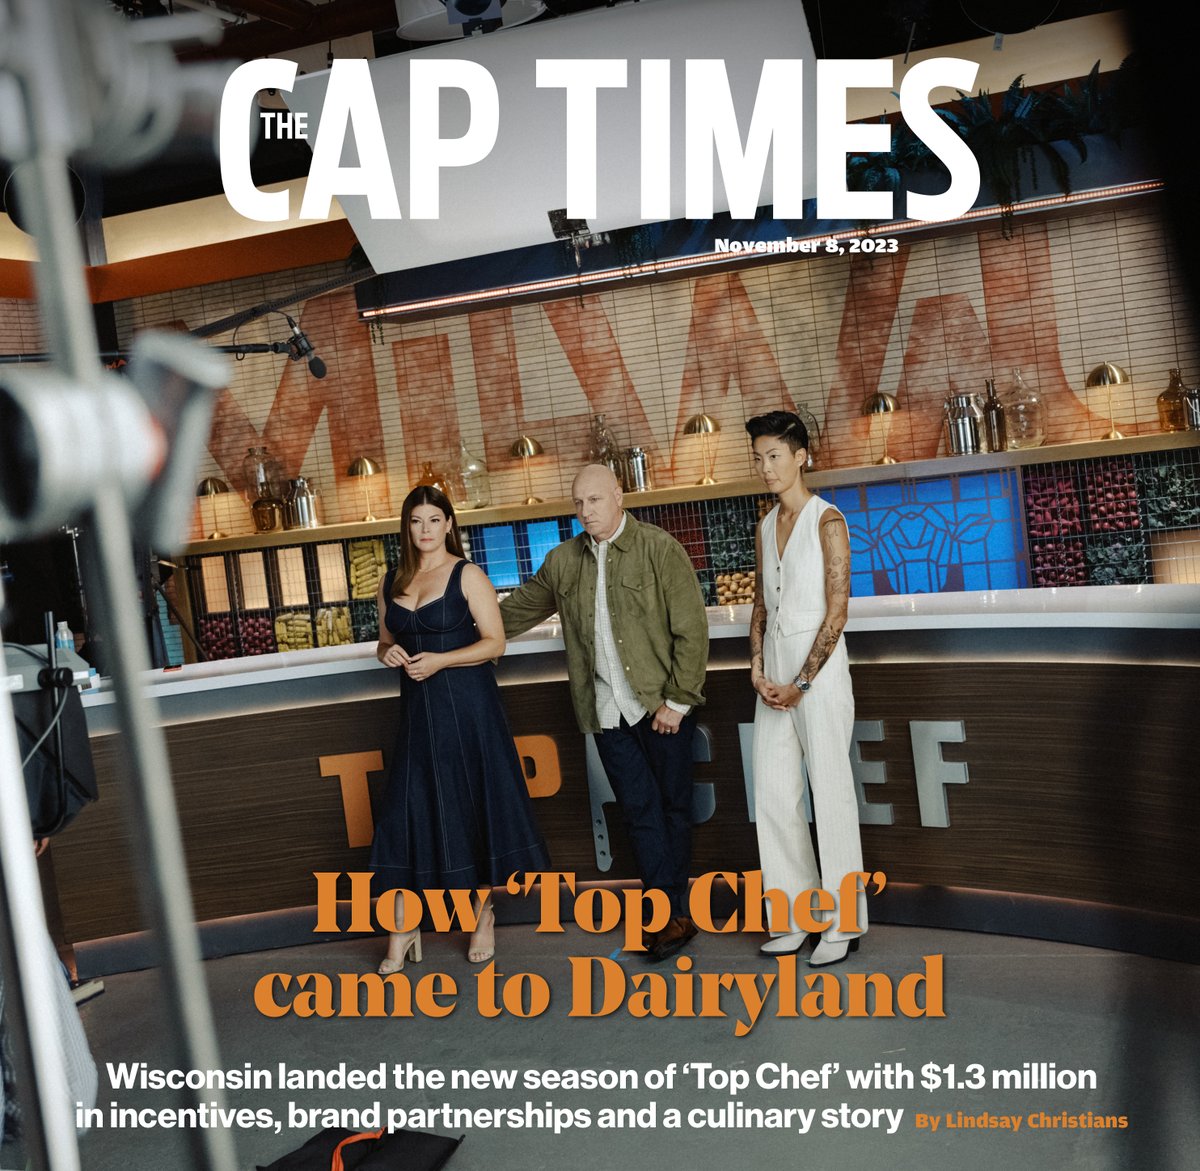 Wisconsin landed the new season of @BravoTopChef with $1.3 million in incentives, including partnerships with dairy farmers, cranberry growers and local tourism boards. captimes.com/food-drink/how…